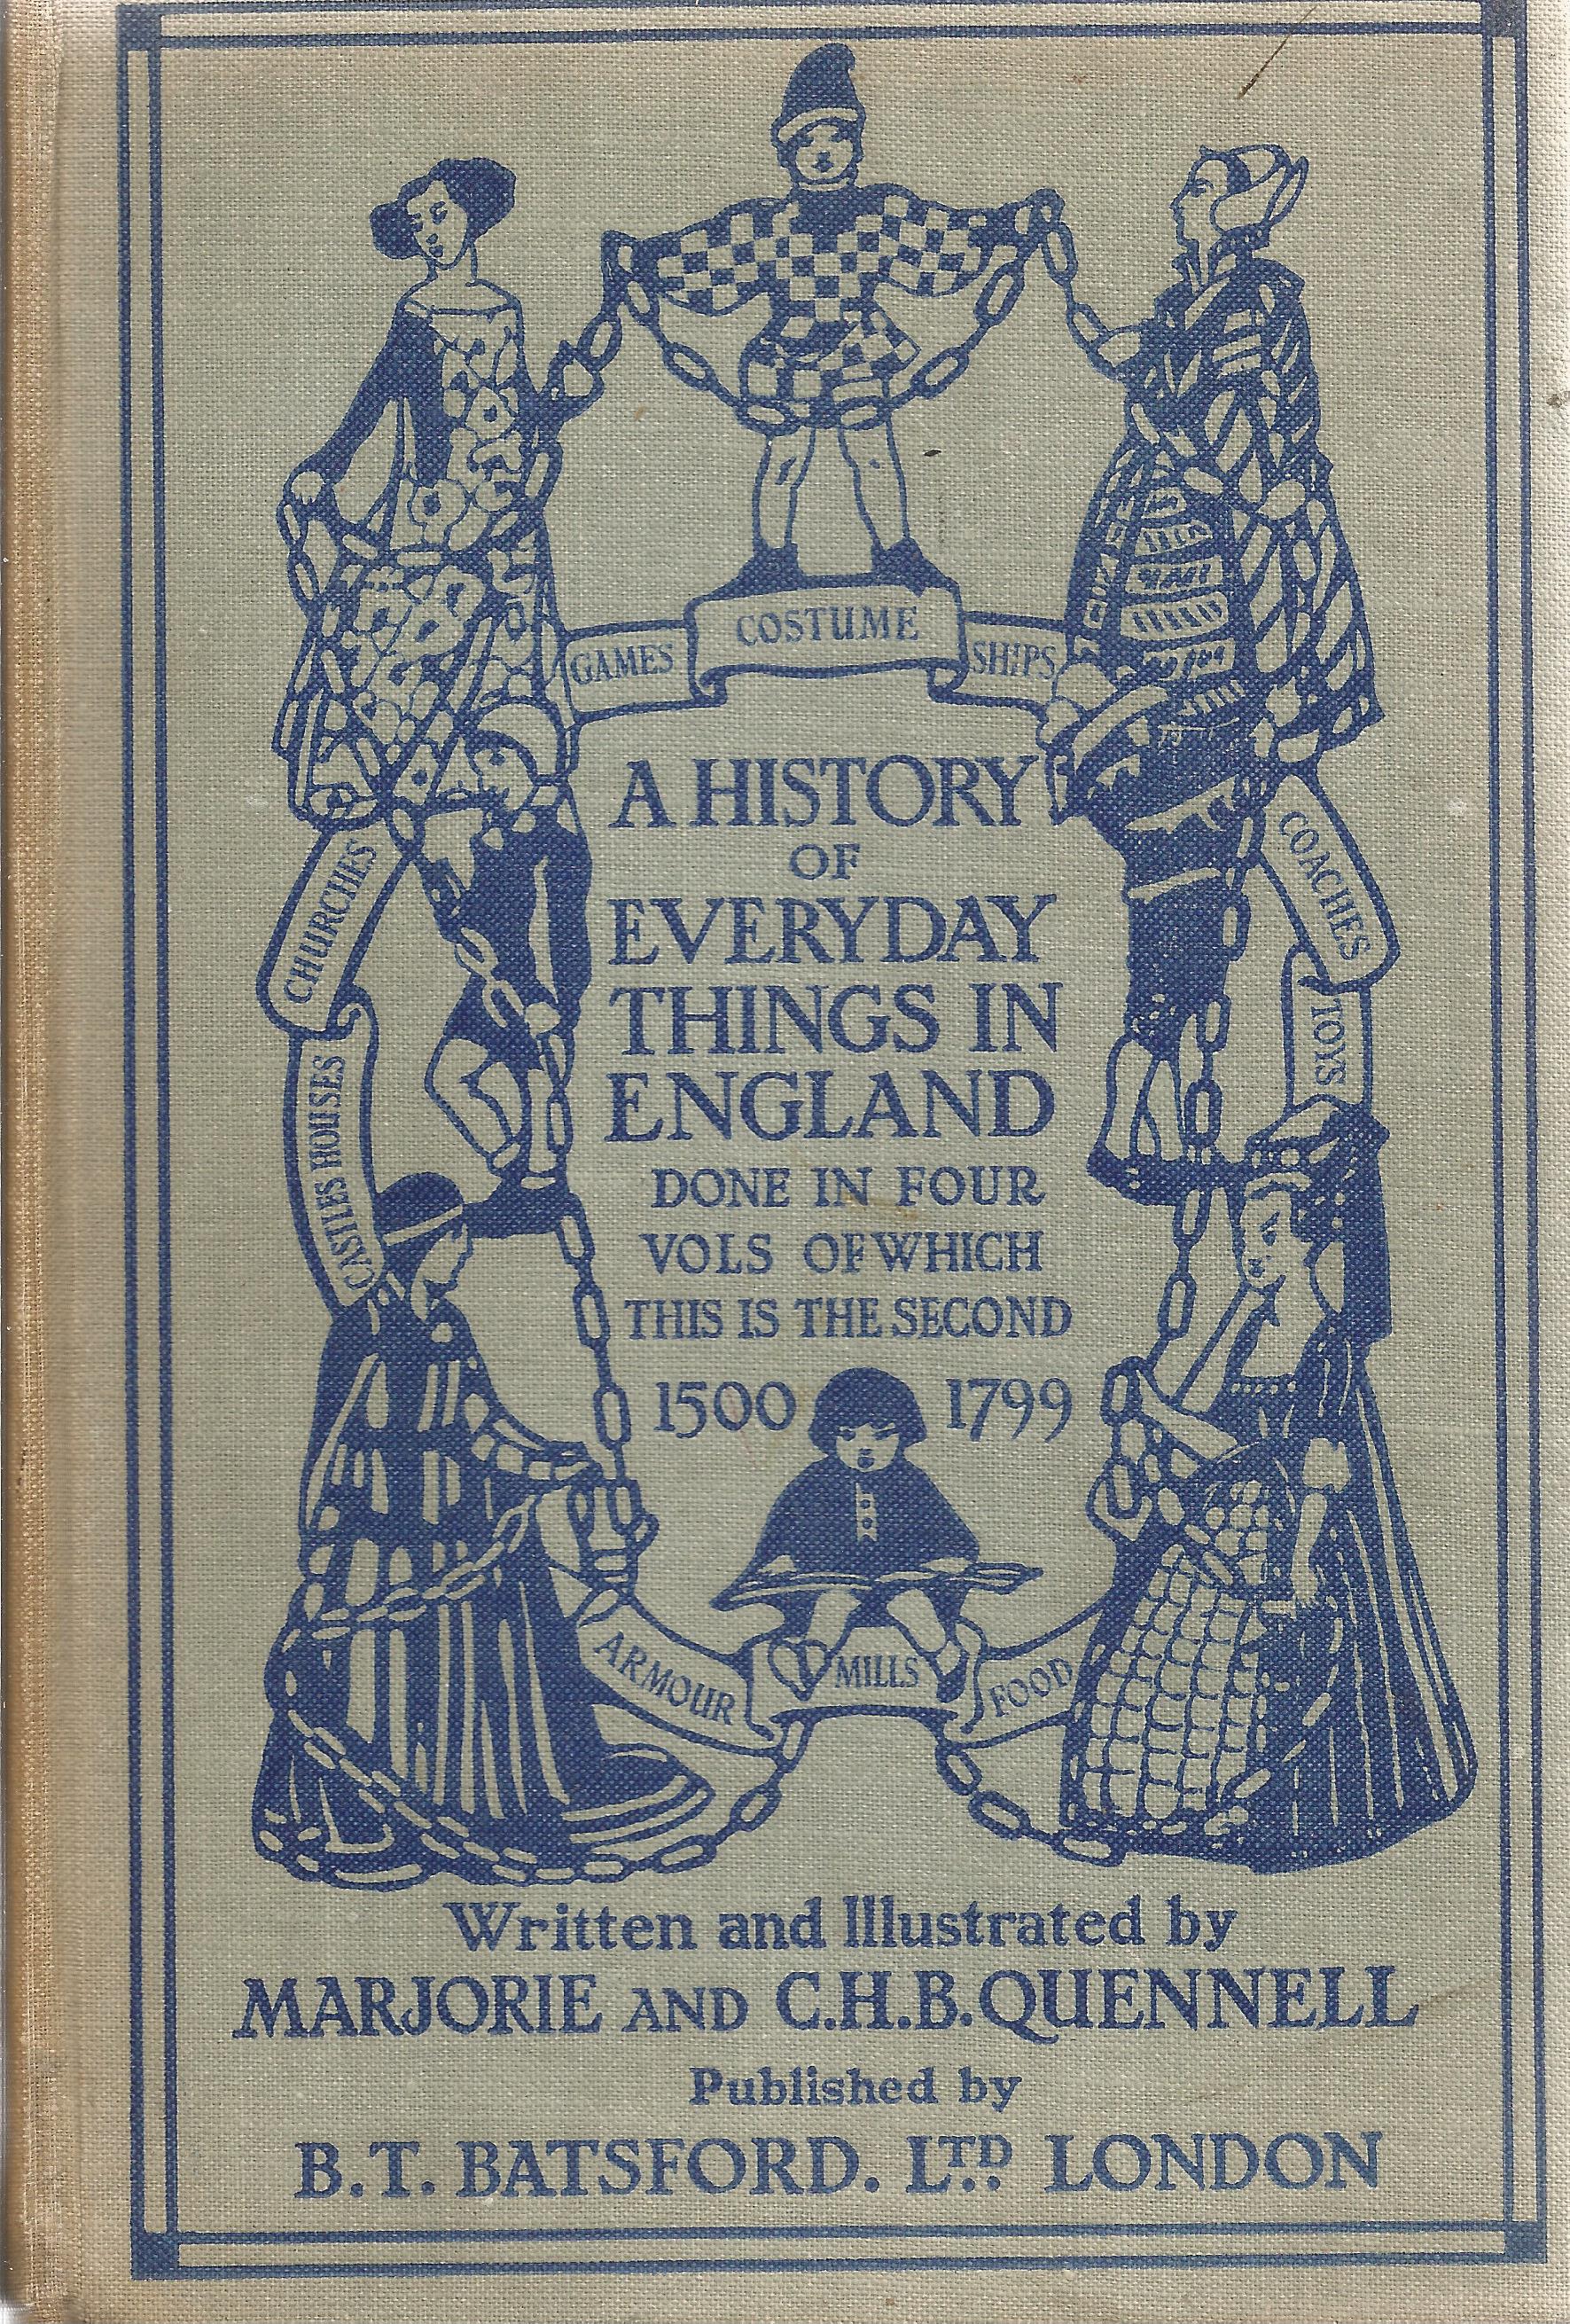 Marjorie & C H B Quennell hardback book A History of Everyday things in England 1937 published by B.